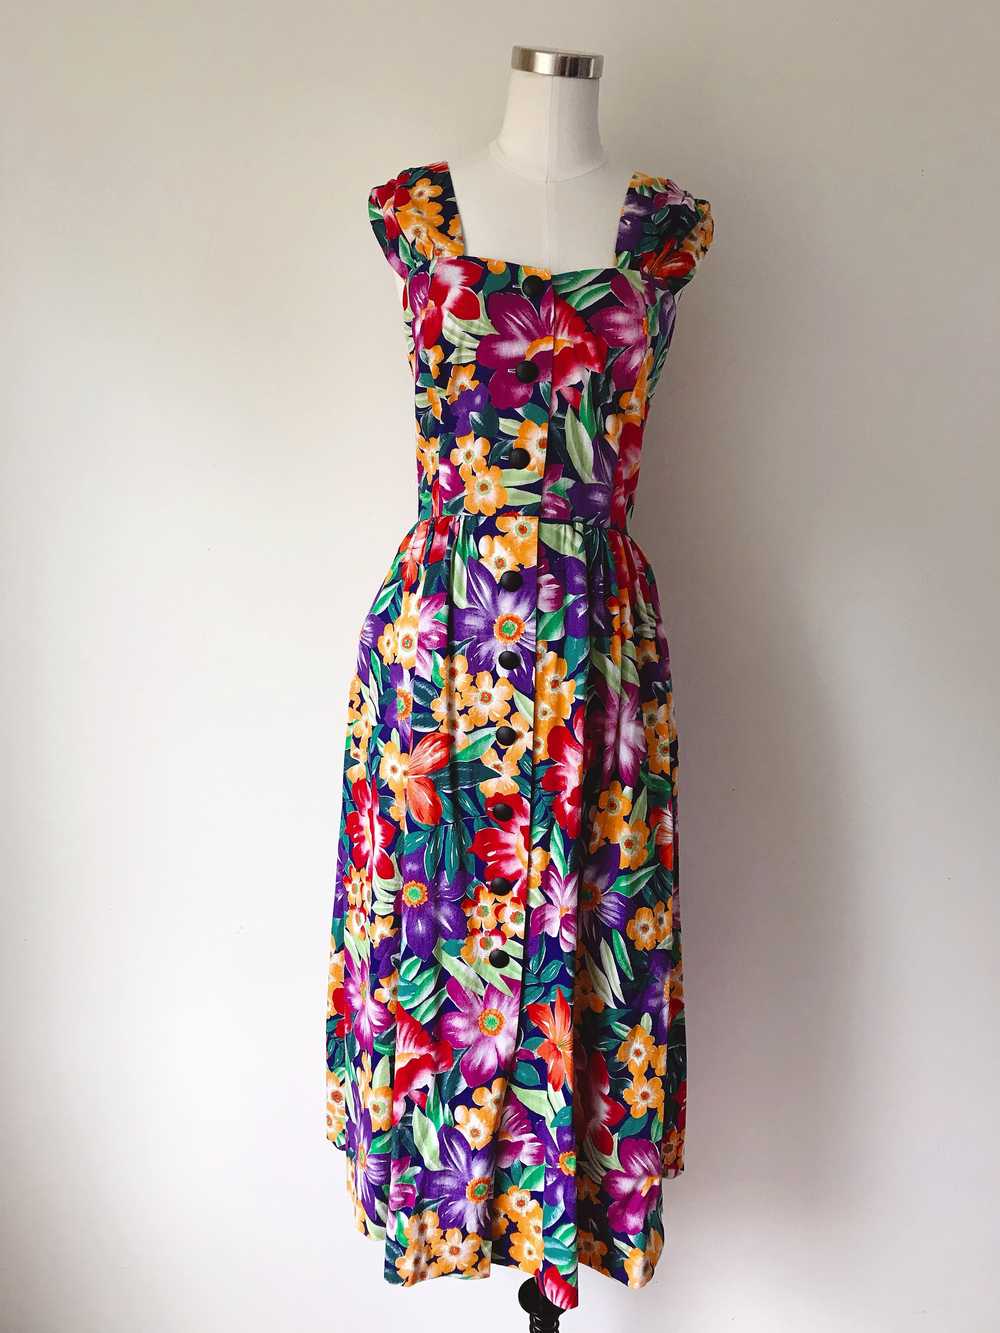 1990s Bright Floral Dress - image 1